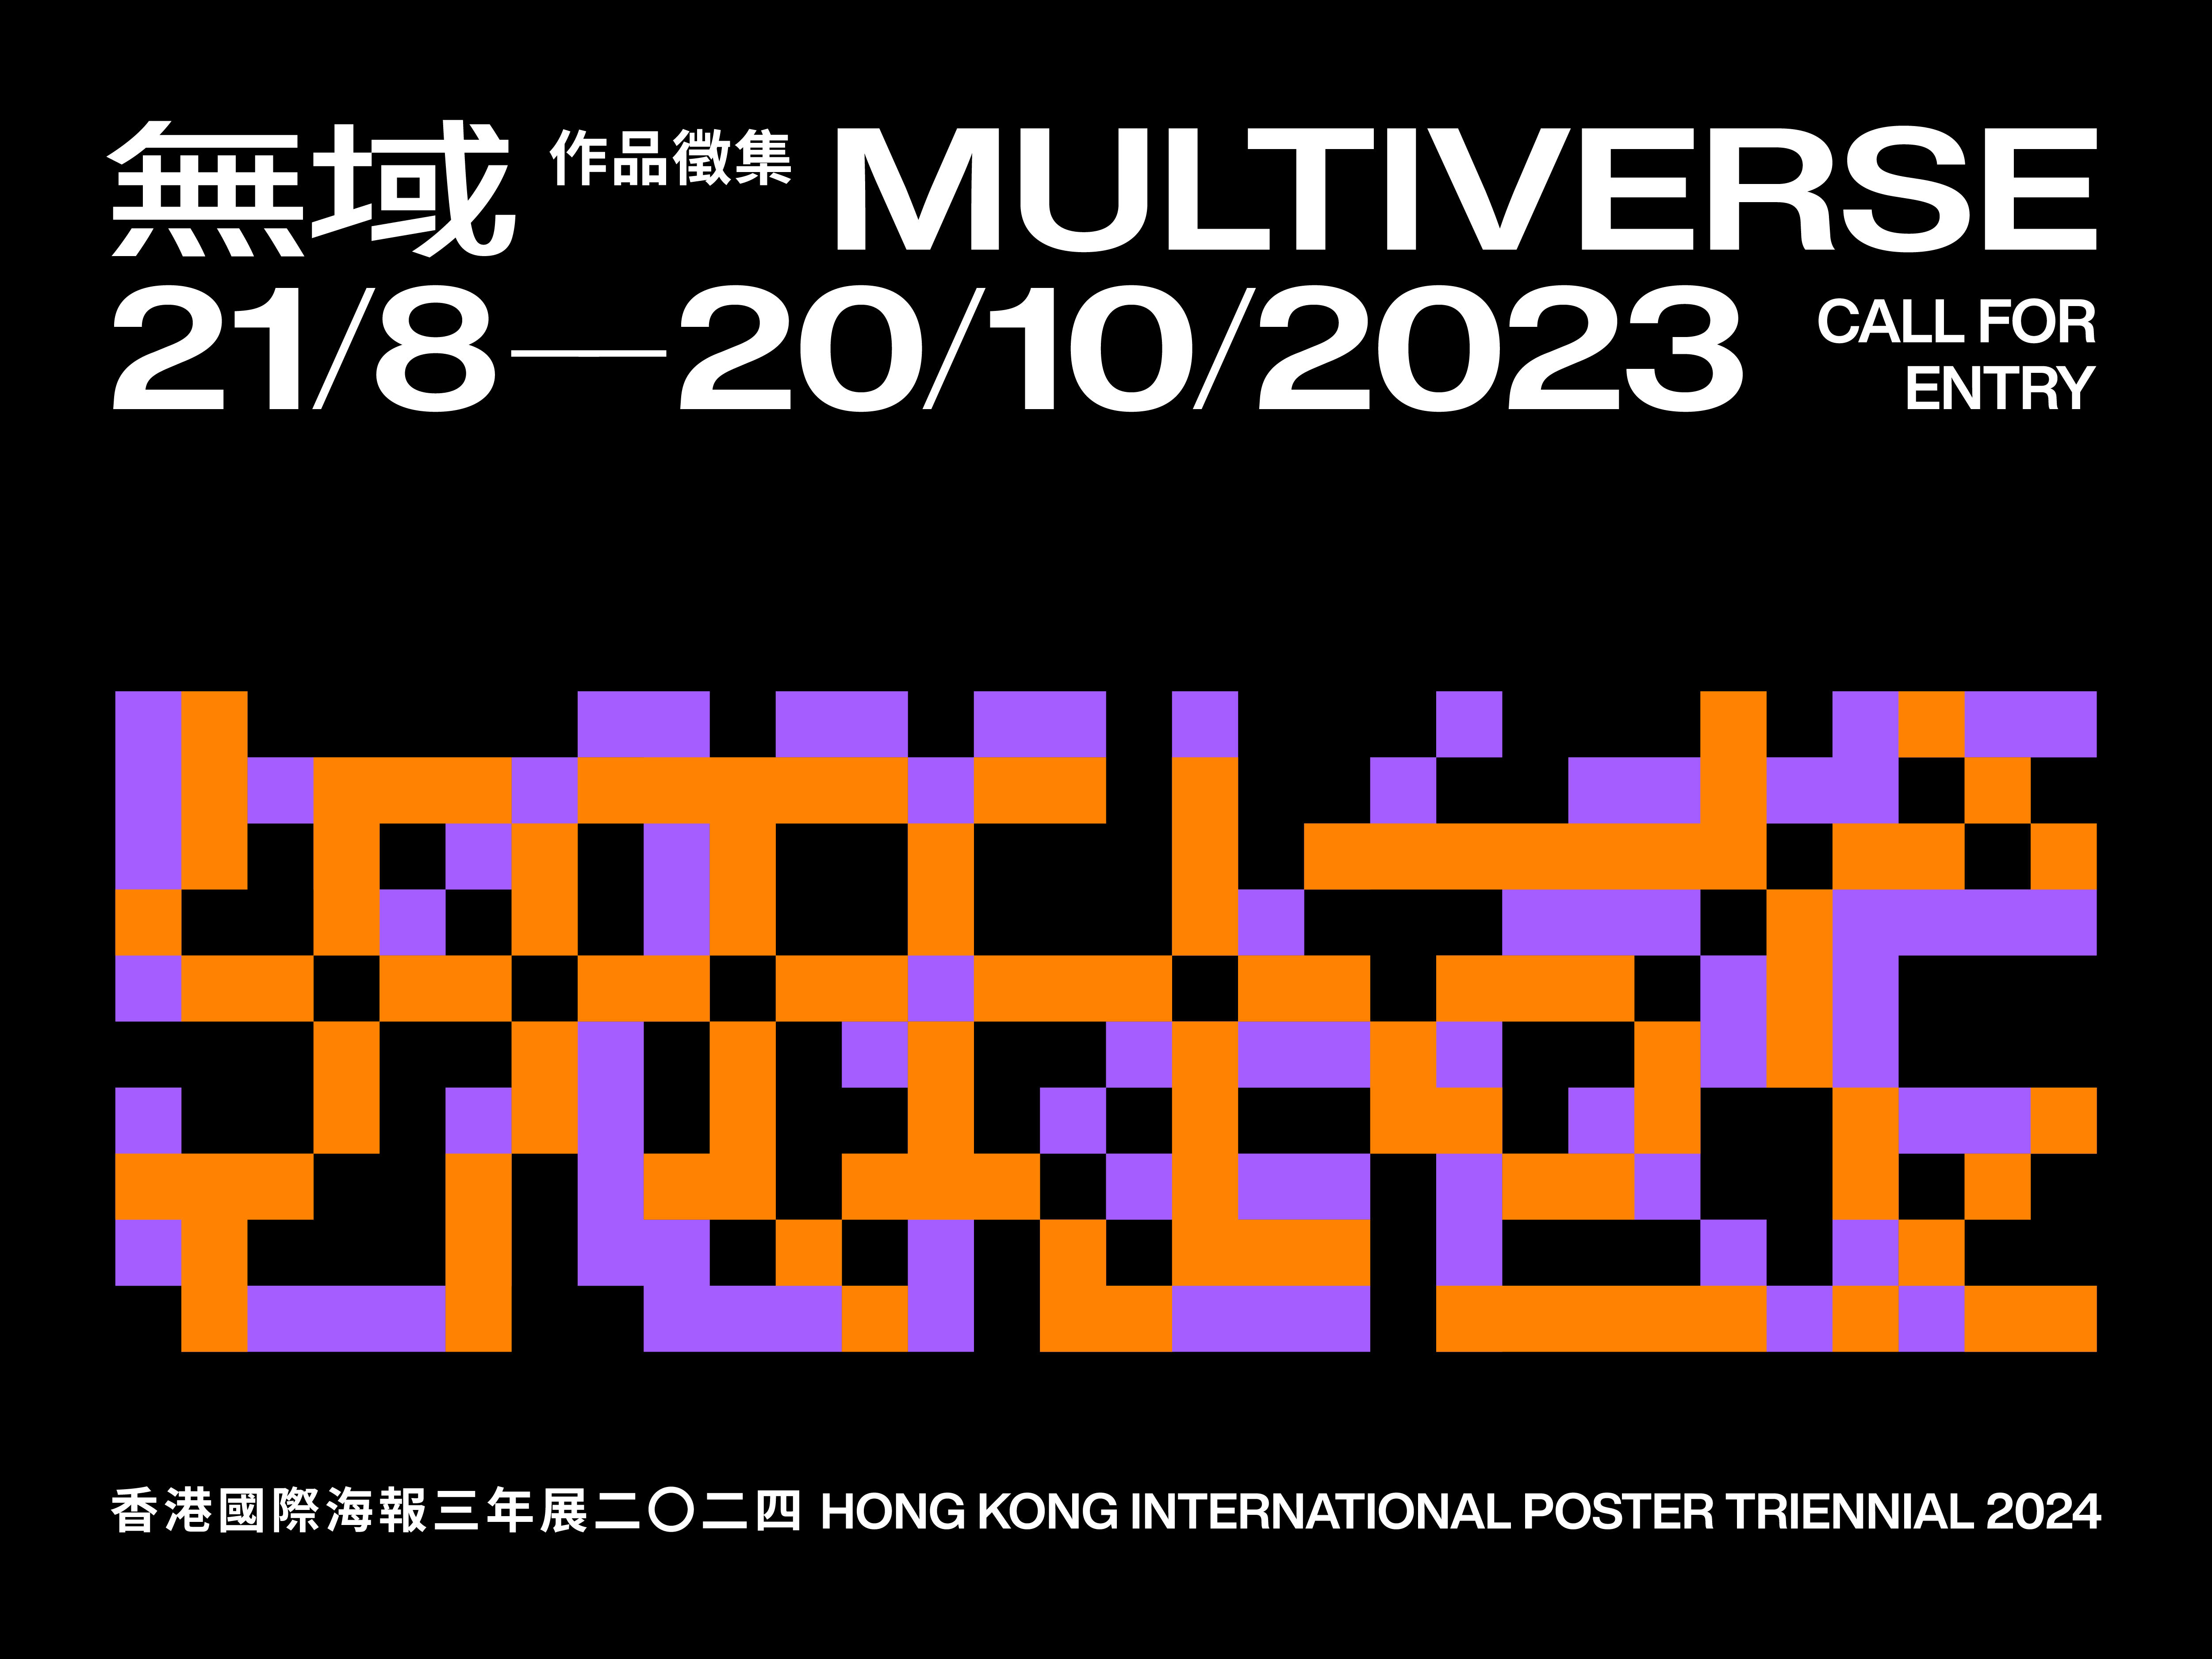 "Multiverse – Hong Kong International Poster Triennial 2024" Competition Call for Entry